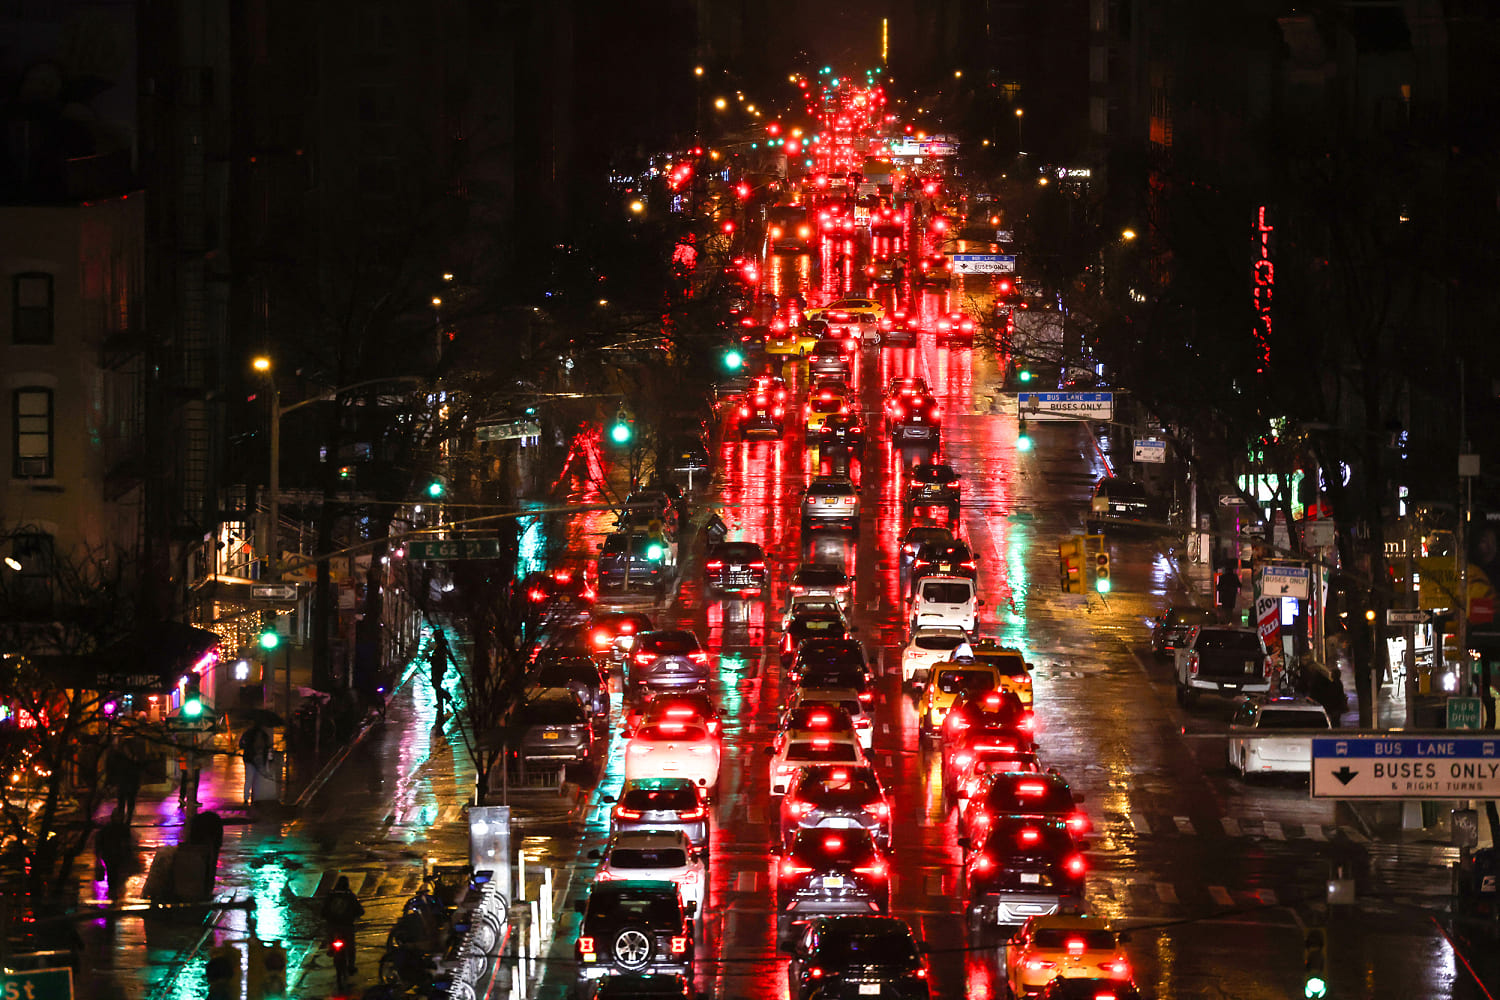 New York City congestion pricing, first in the nation, is approved at $15 and up for vehicles